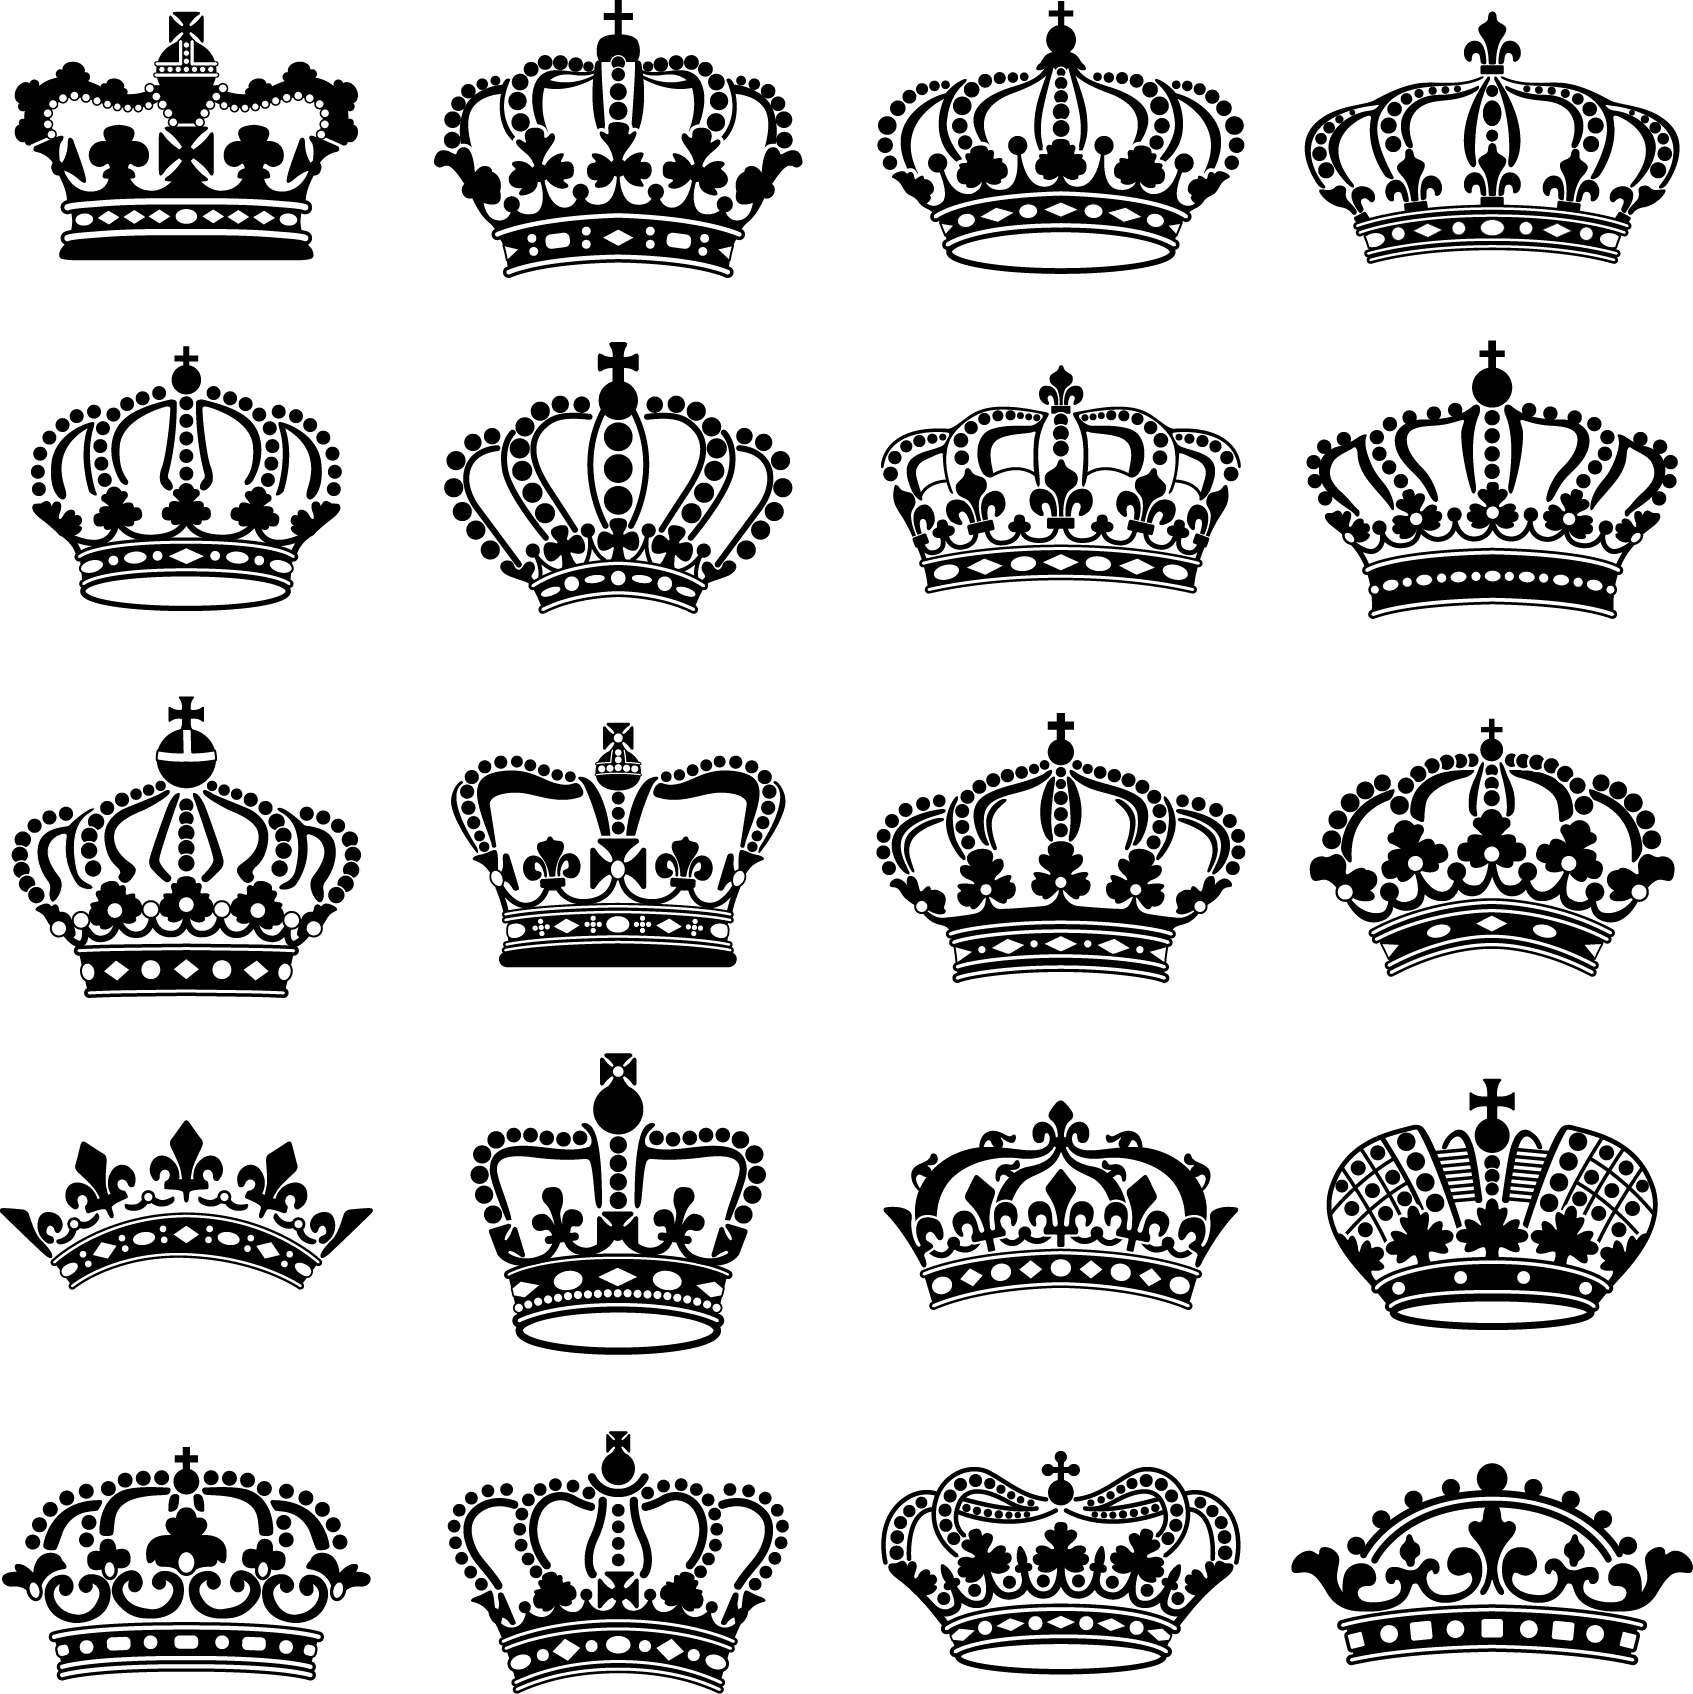 Painted Tiara Black Crown Hand PNG File HD Clipart